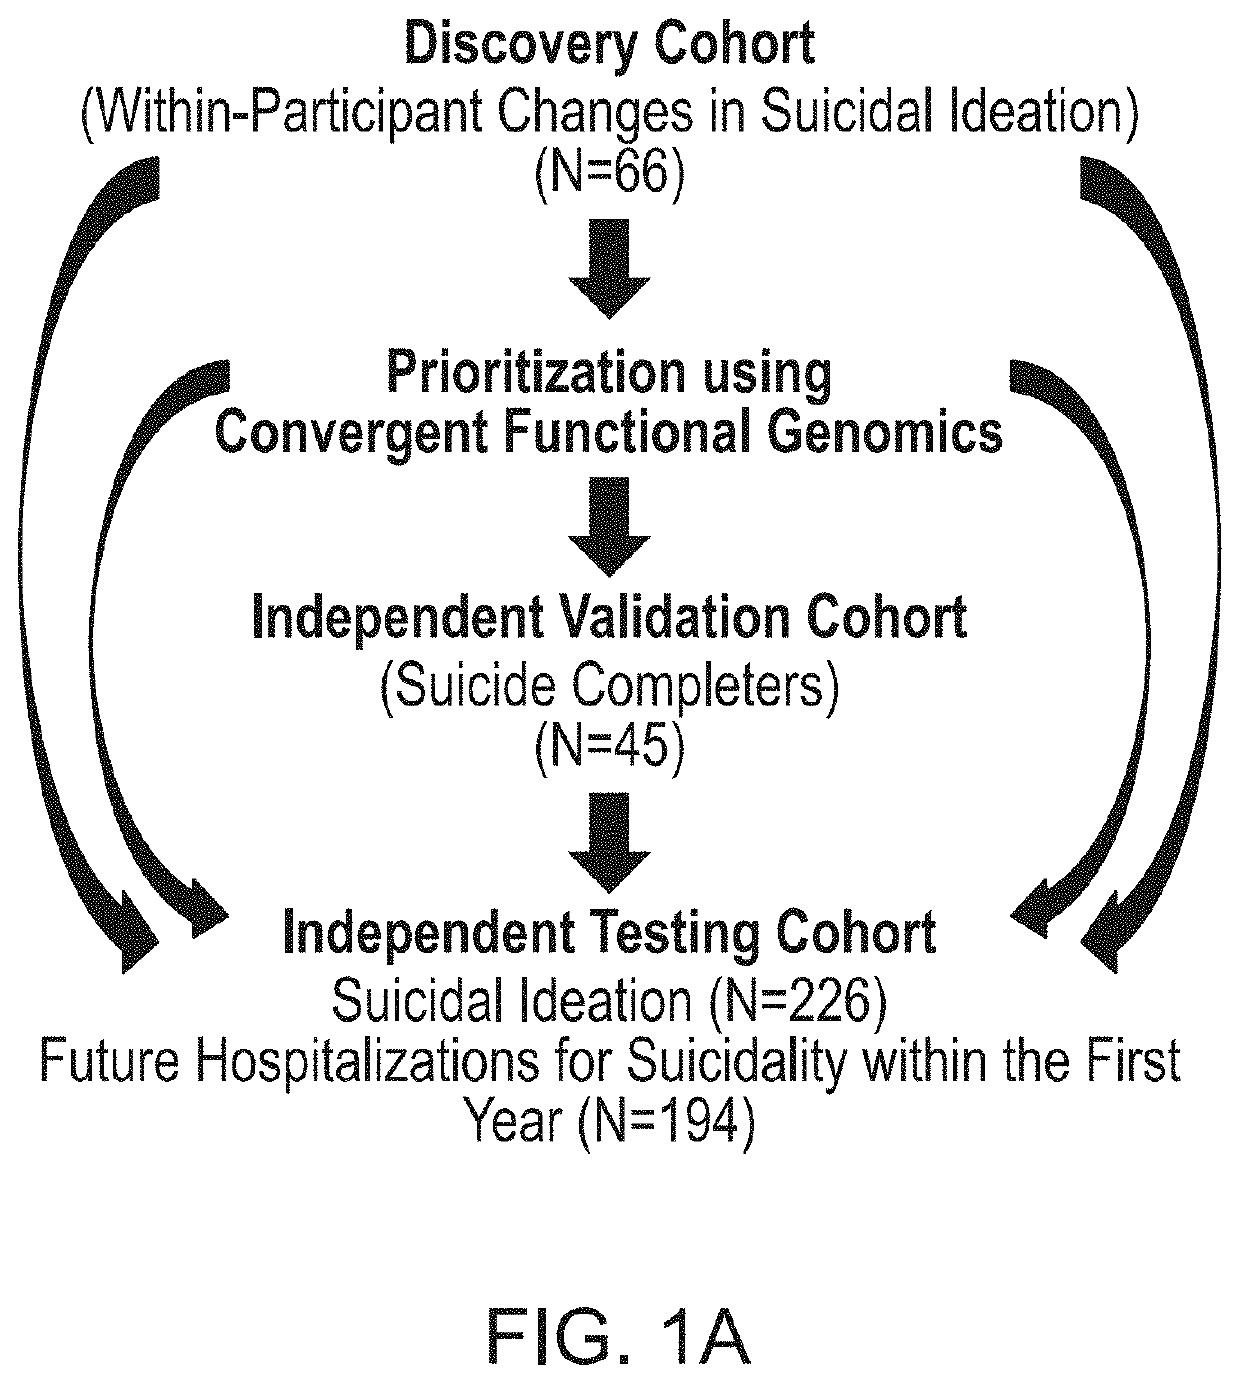 Precision medicine for treating and preventing suicidality